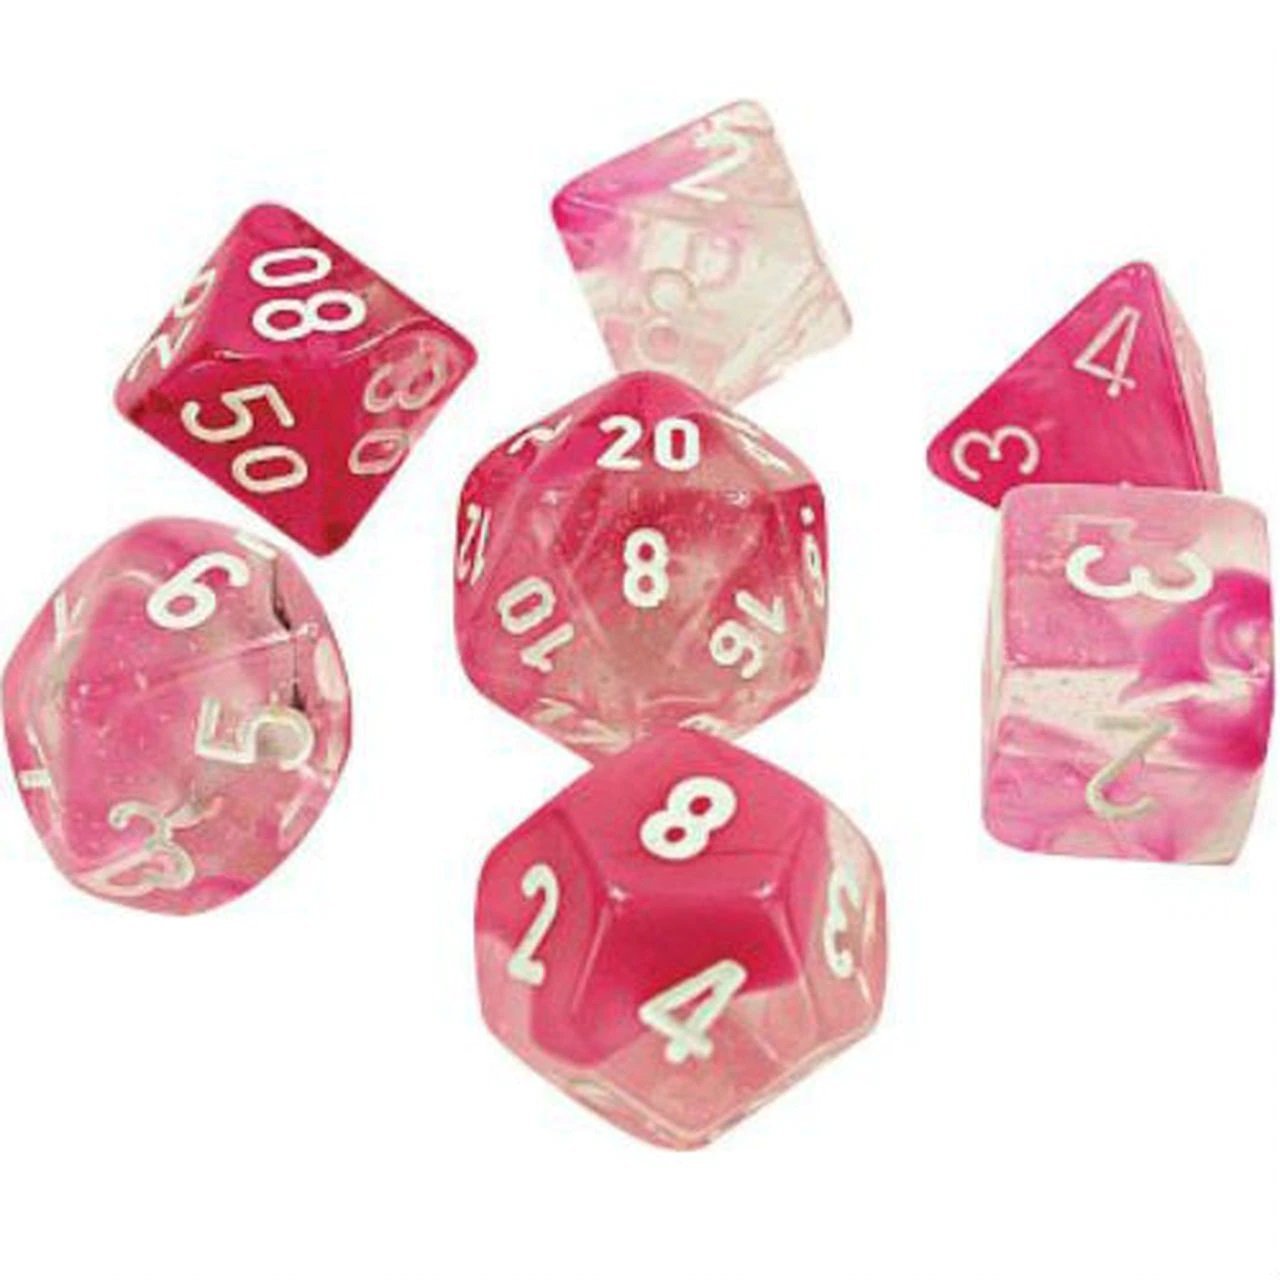 Chessex Lab Dice Gemini? Clear-Pink Polyhedral Dice with White Numbers - Set of 7